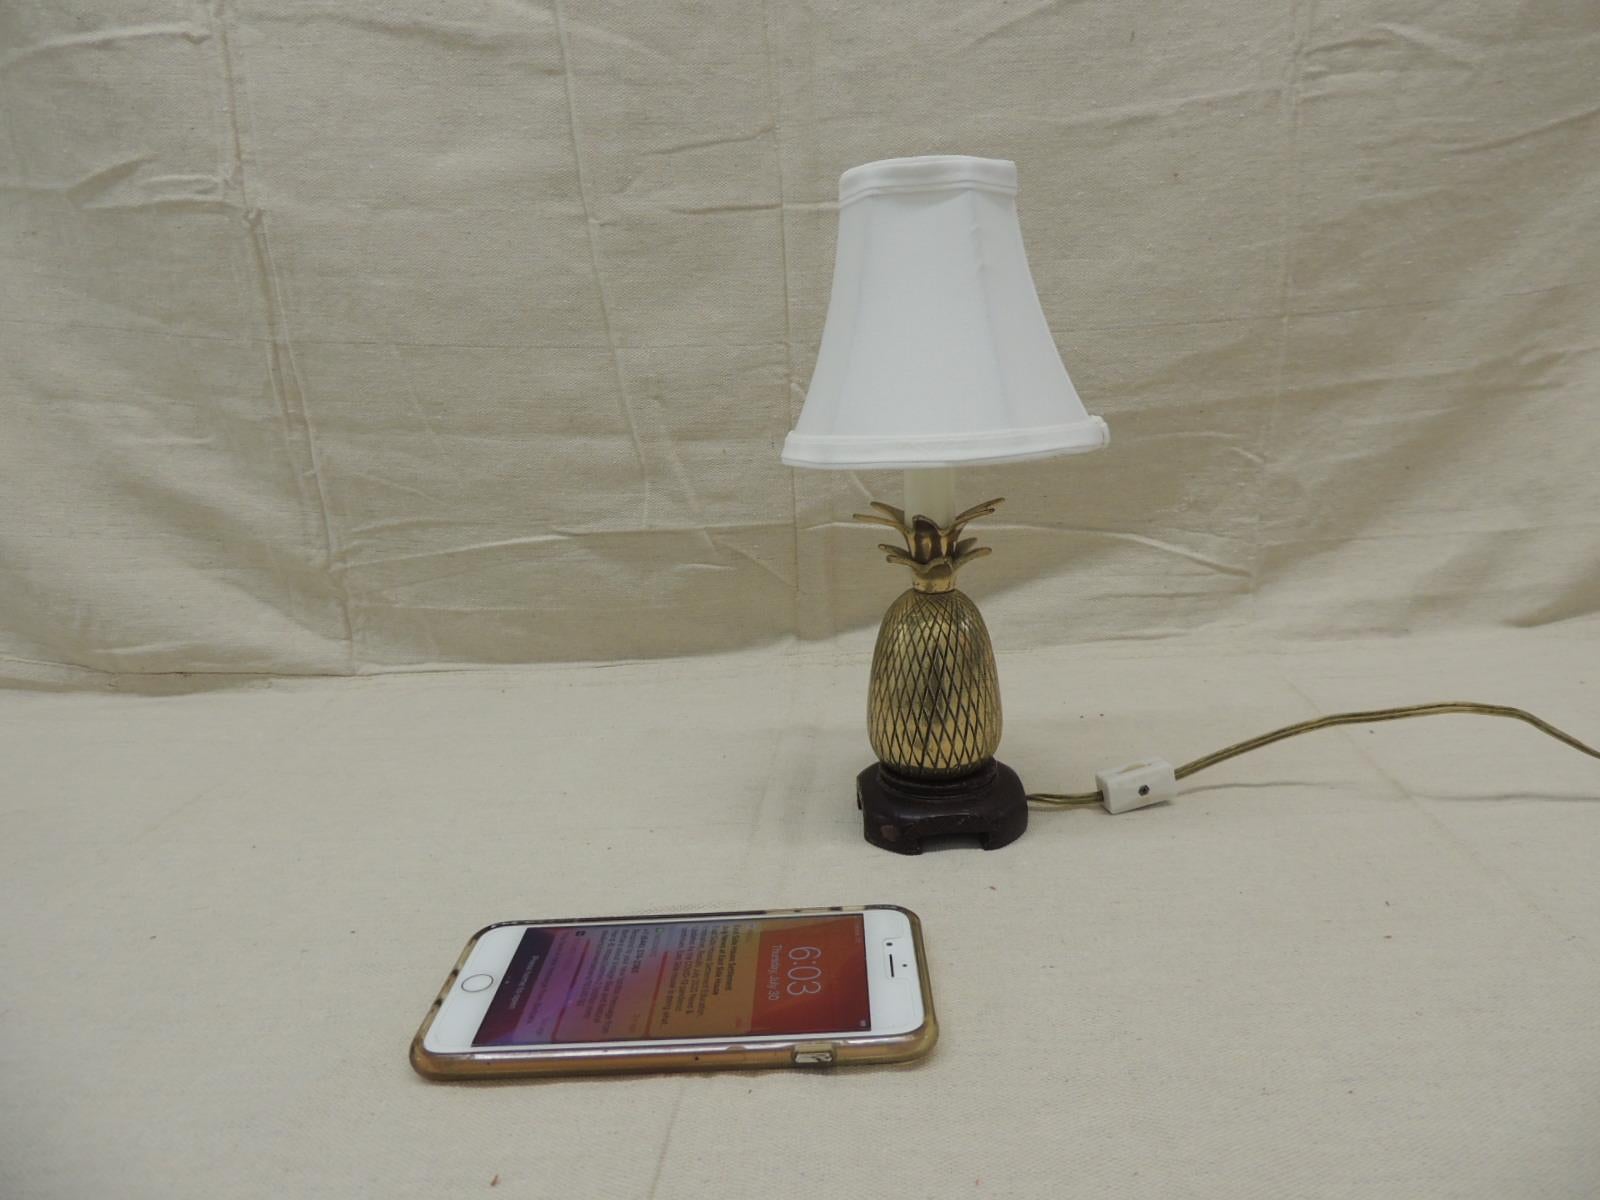 Vintage small brass pineapple decorative table lamp
with wooden base and white silk shade.
On/off cable switch and candelabra bulb.
Size: 11” H x 2.5